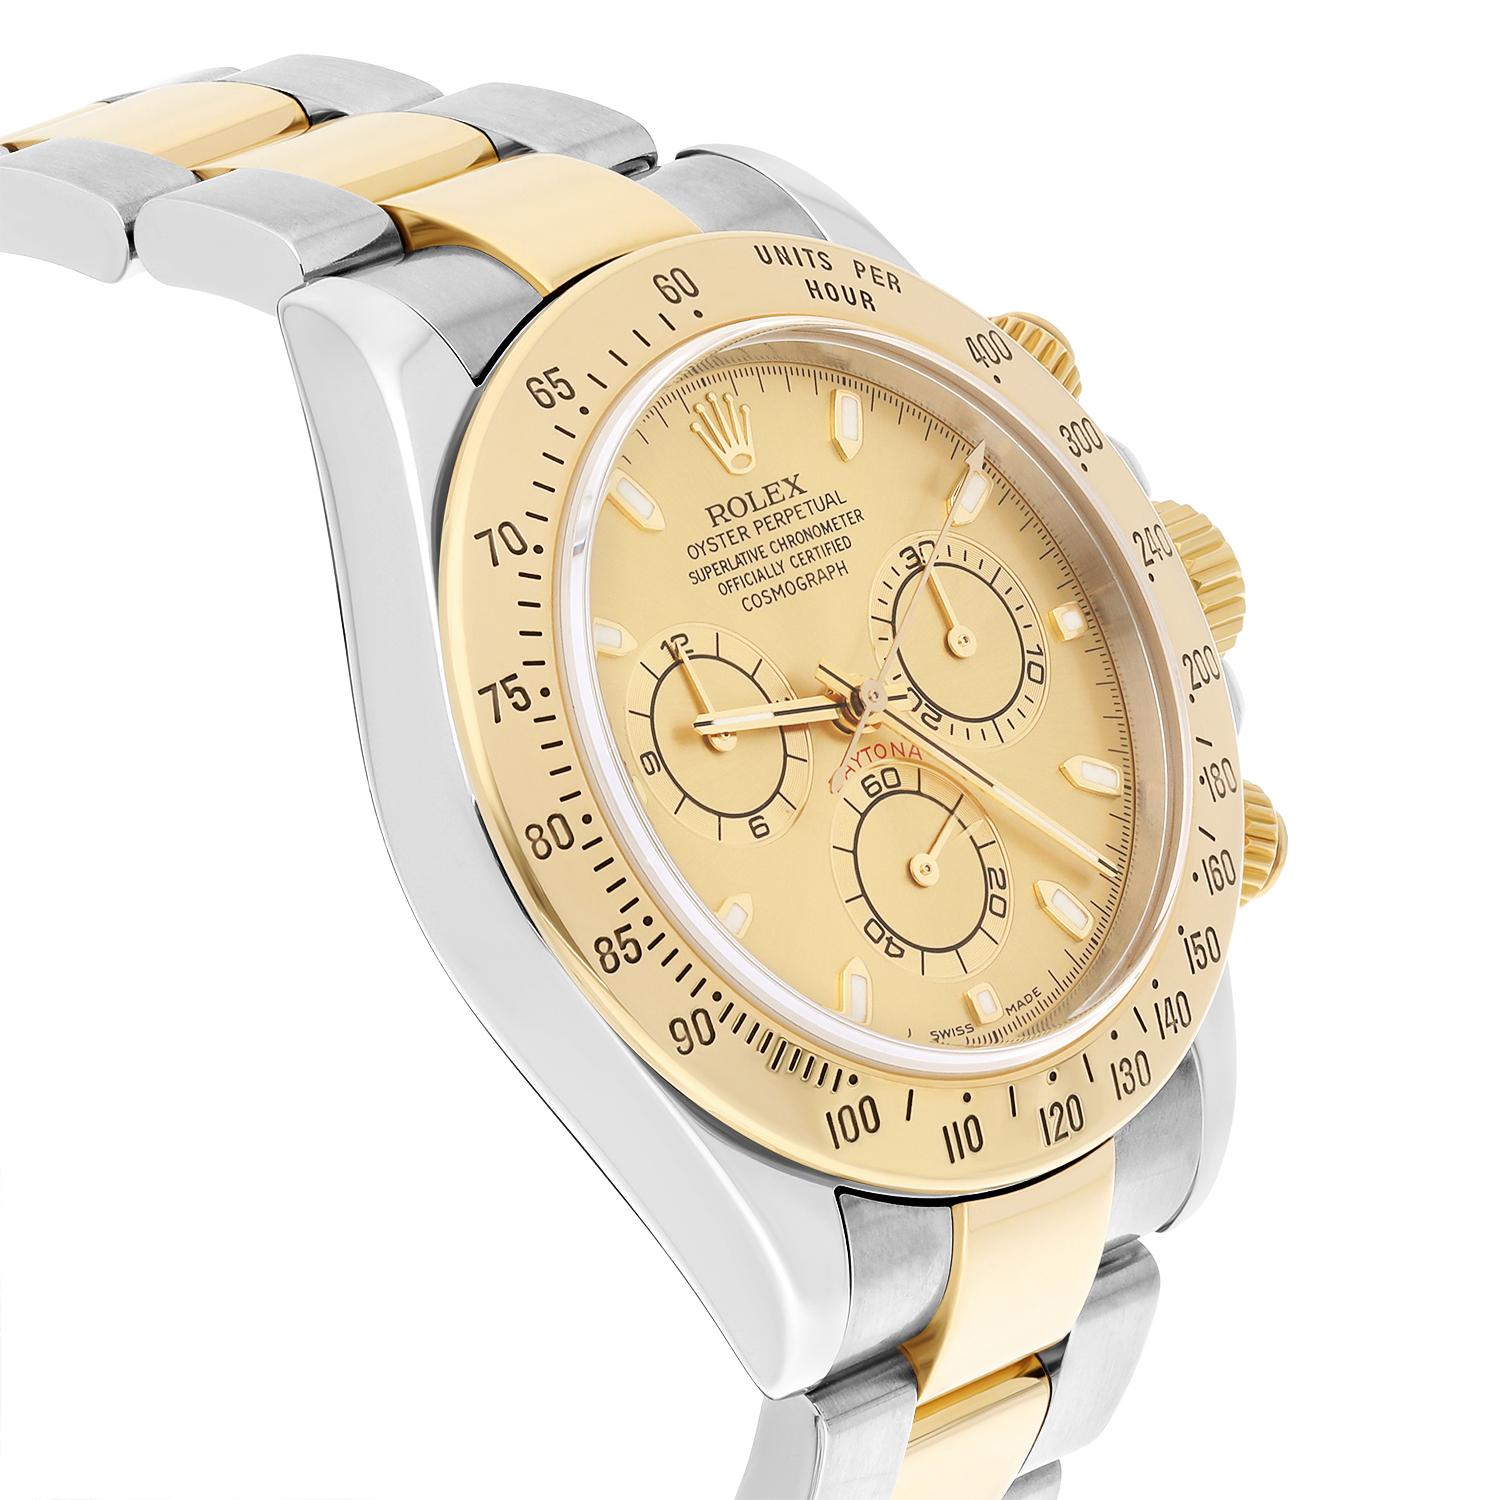 Rolex Daytona Stainless Steel & Yellow Gold Champagne Dial Mens Watch 116523 1